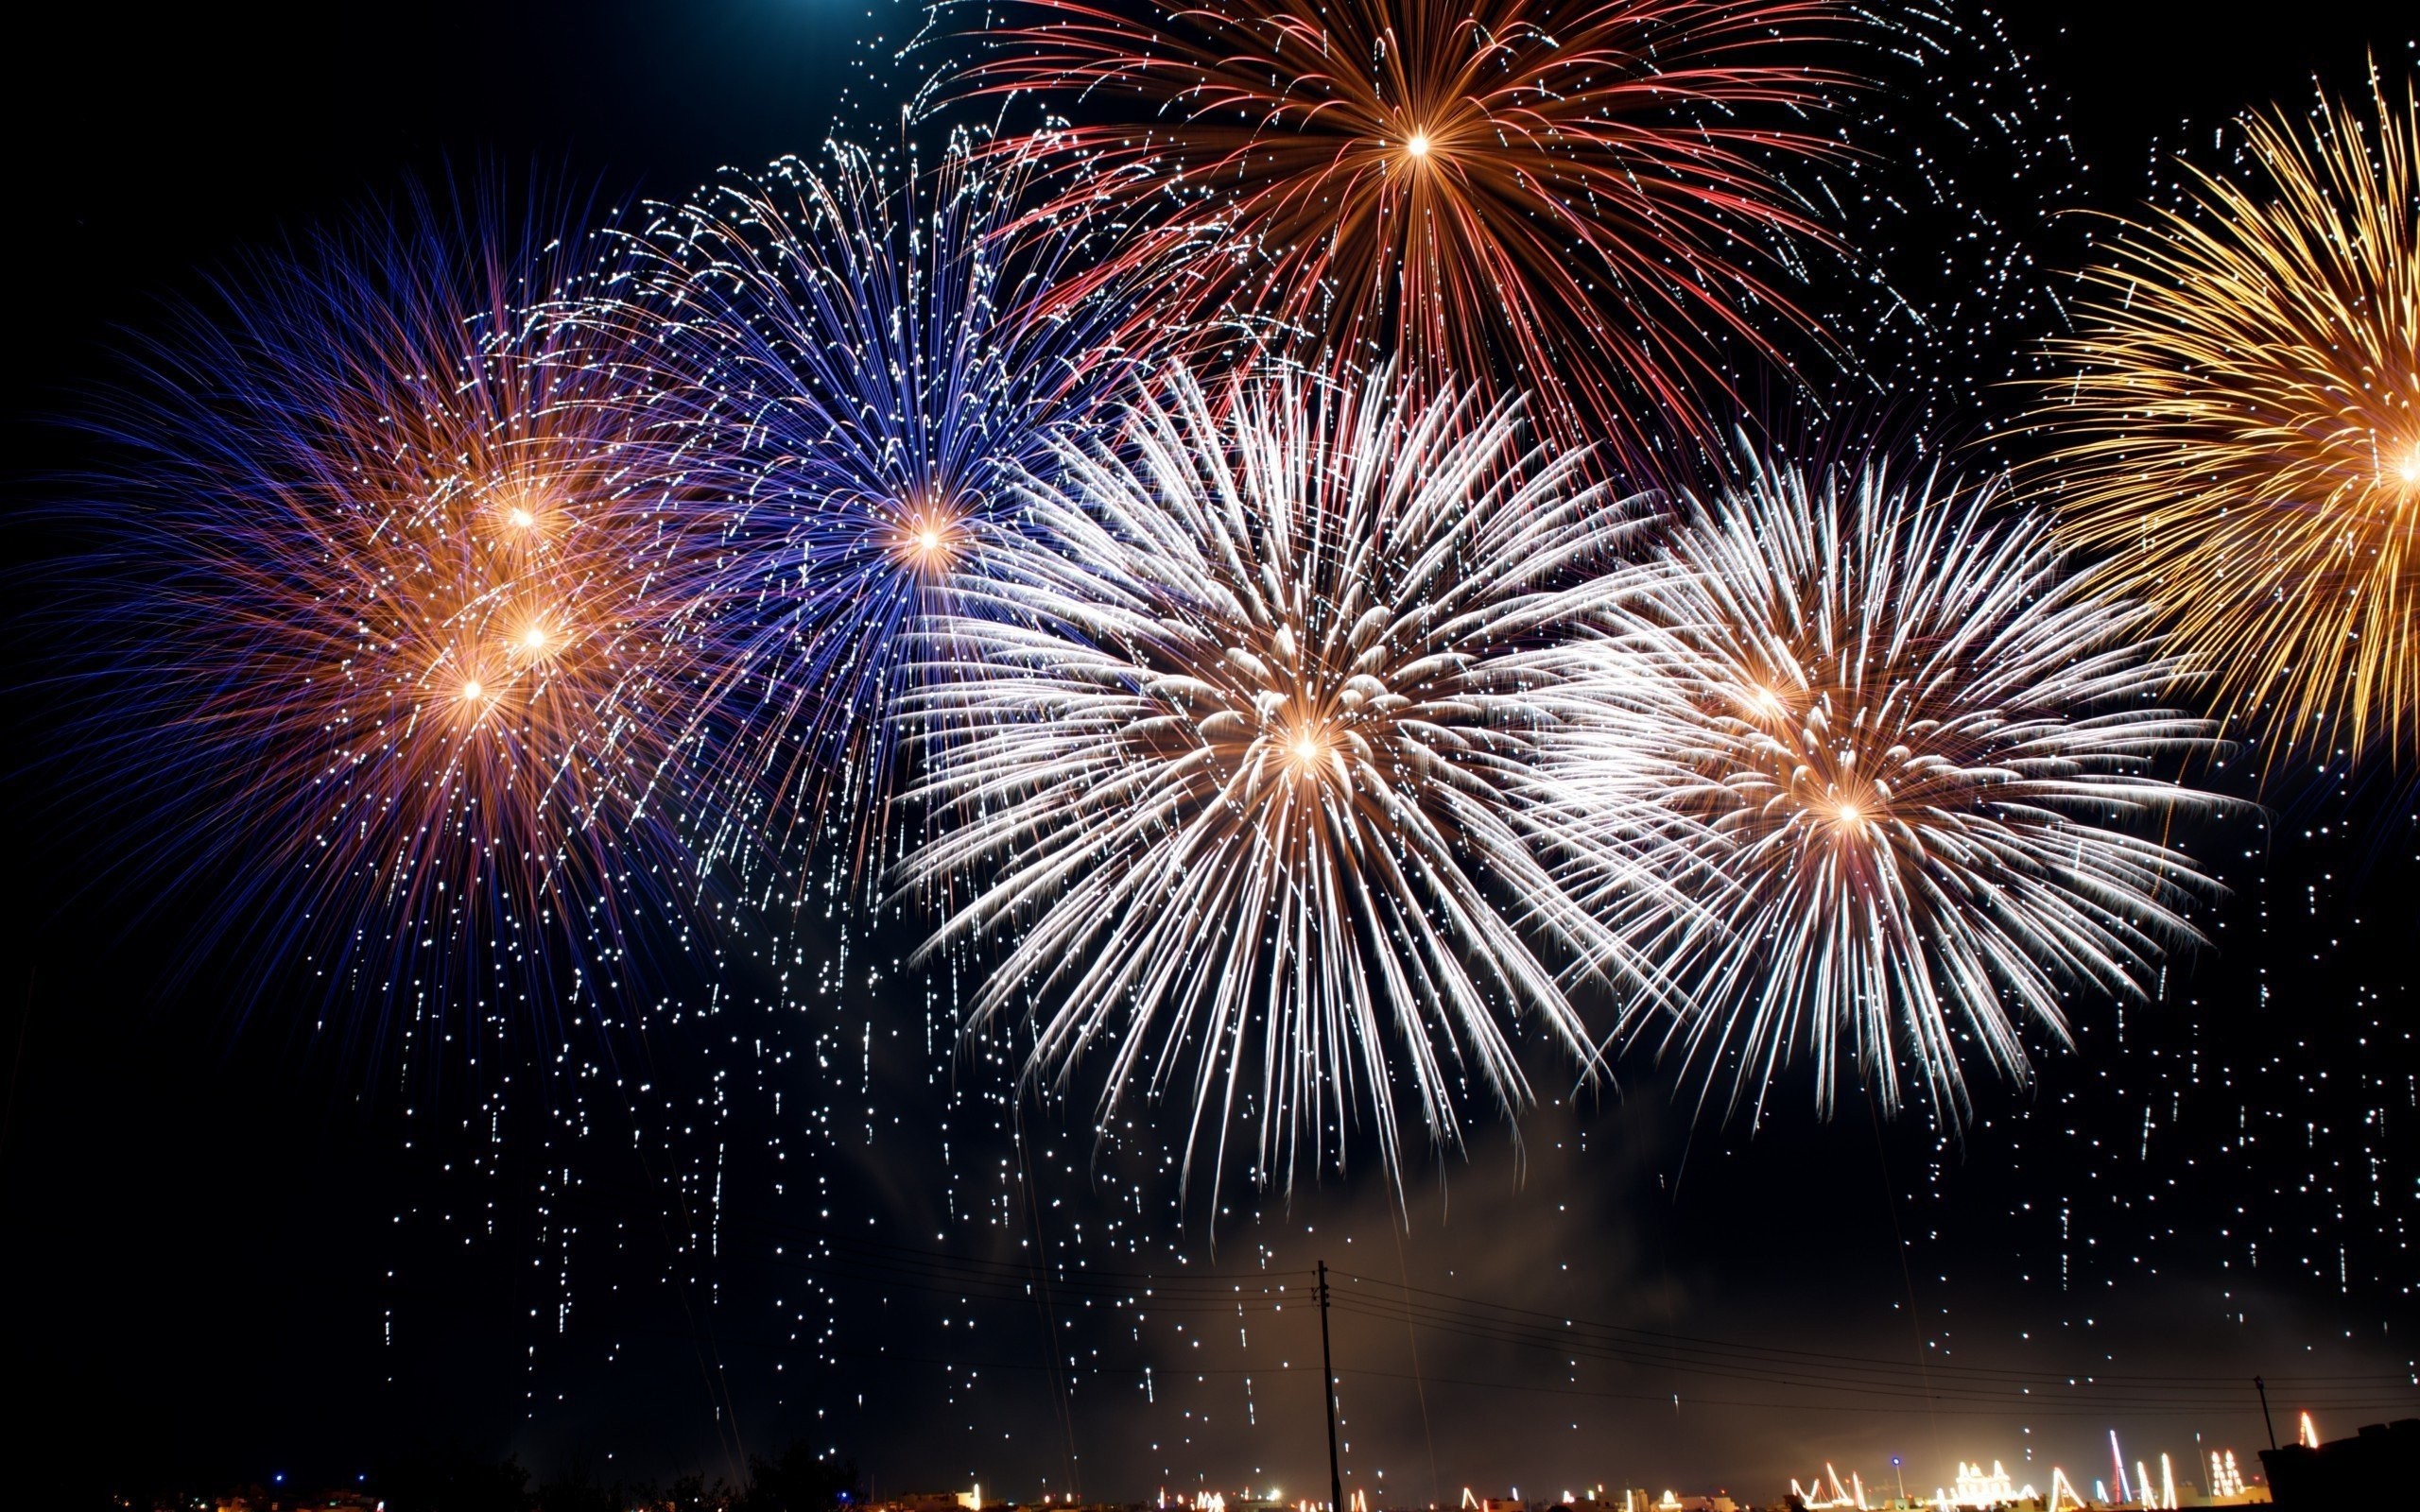 General 2560x1600 fireworks outdoors night colorful